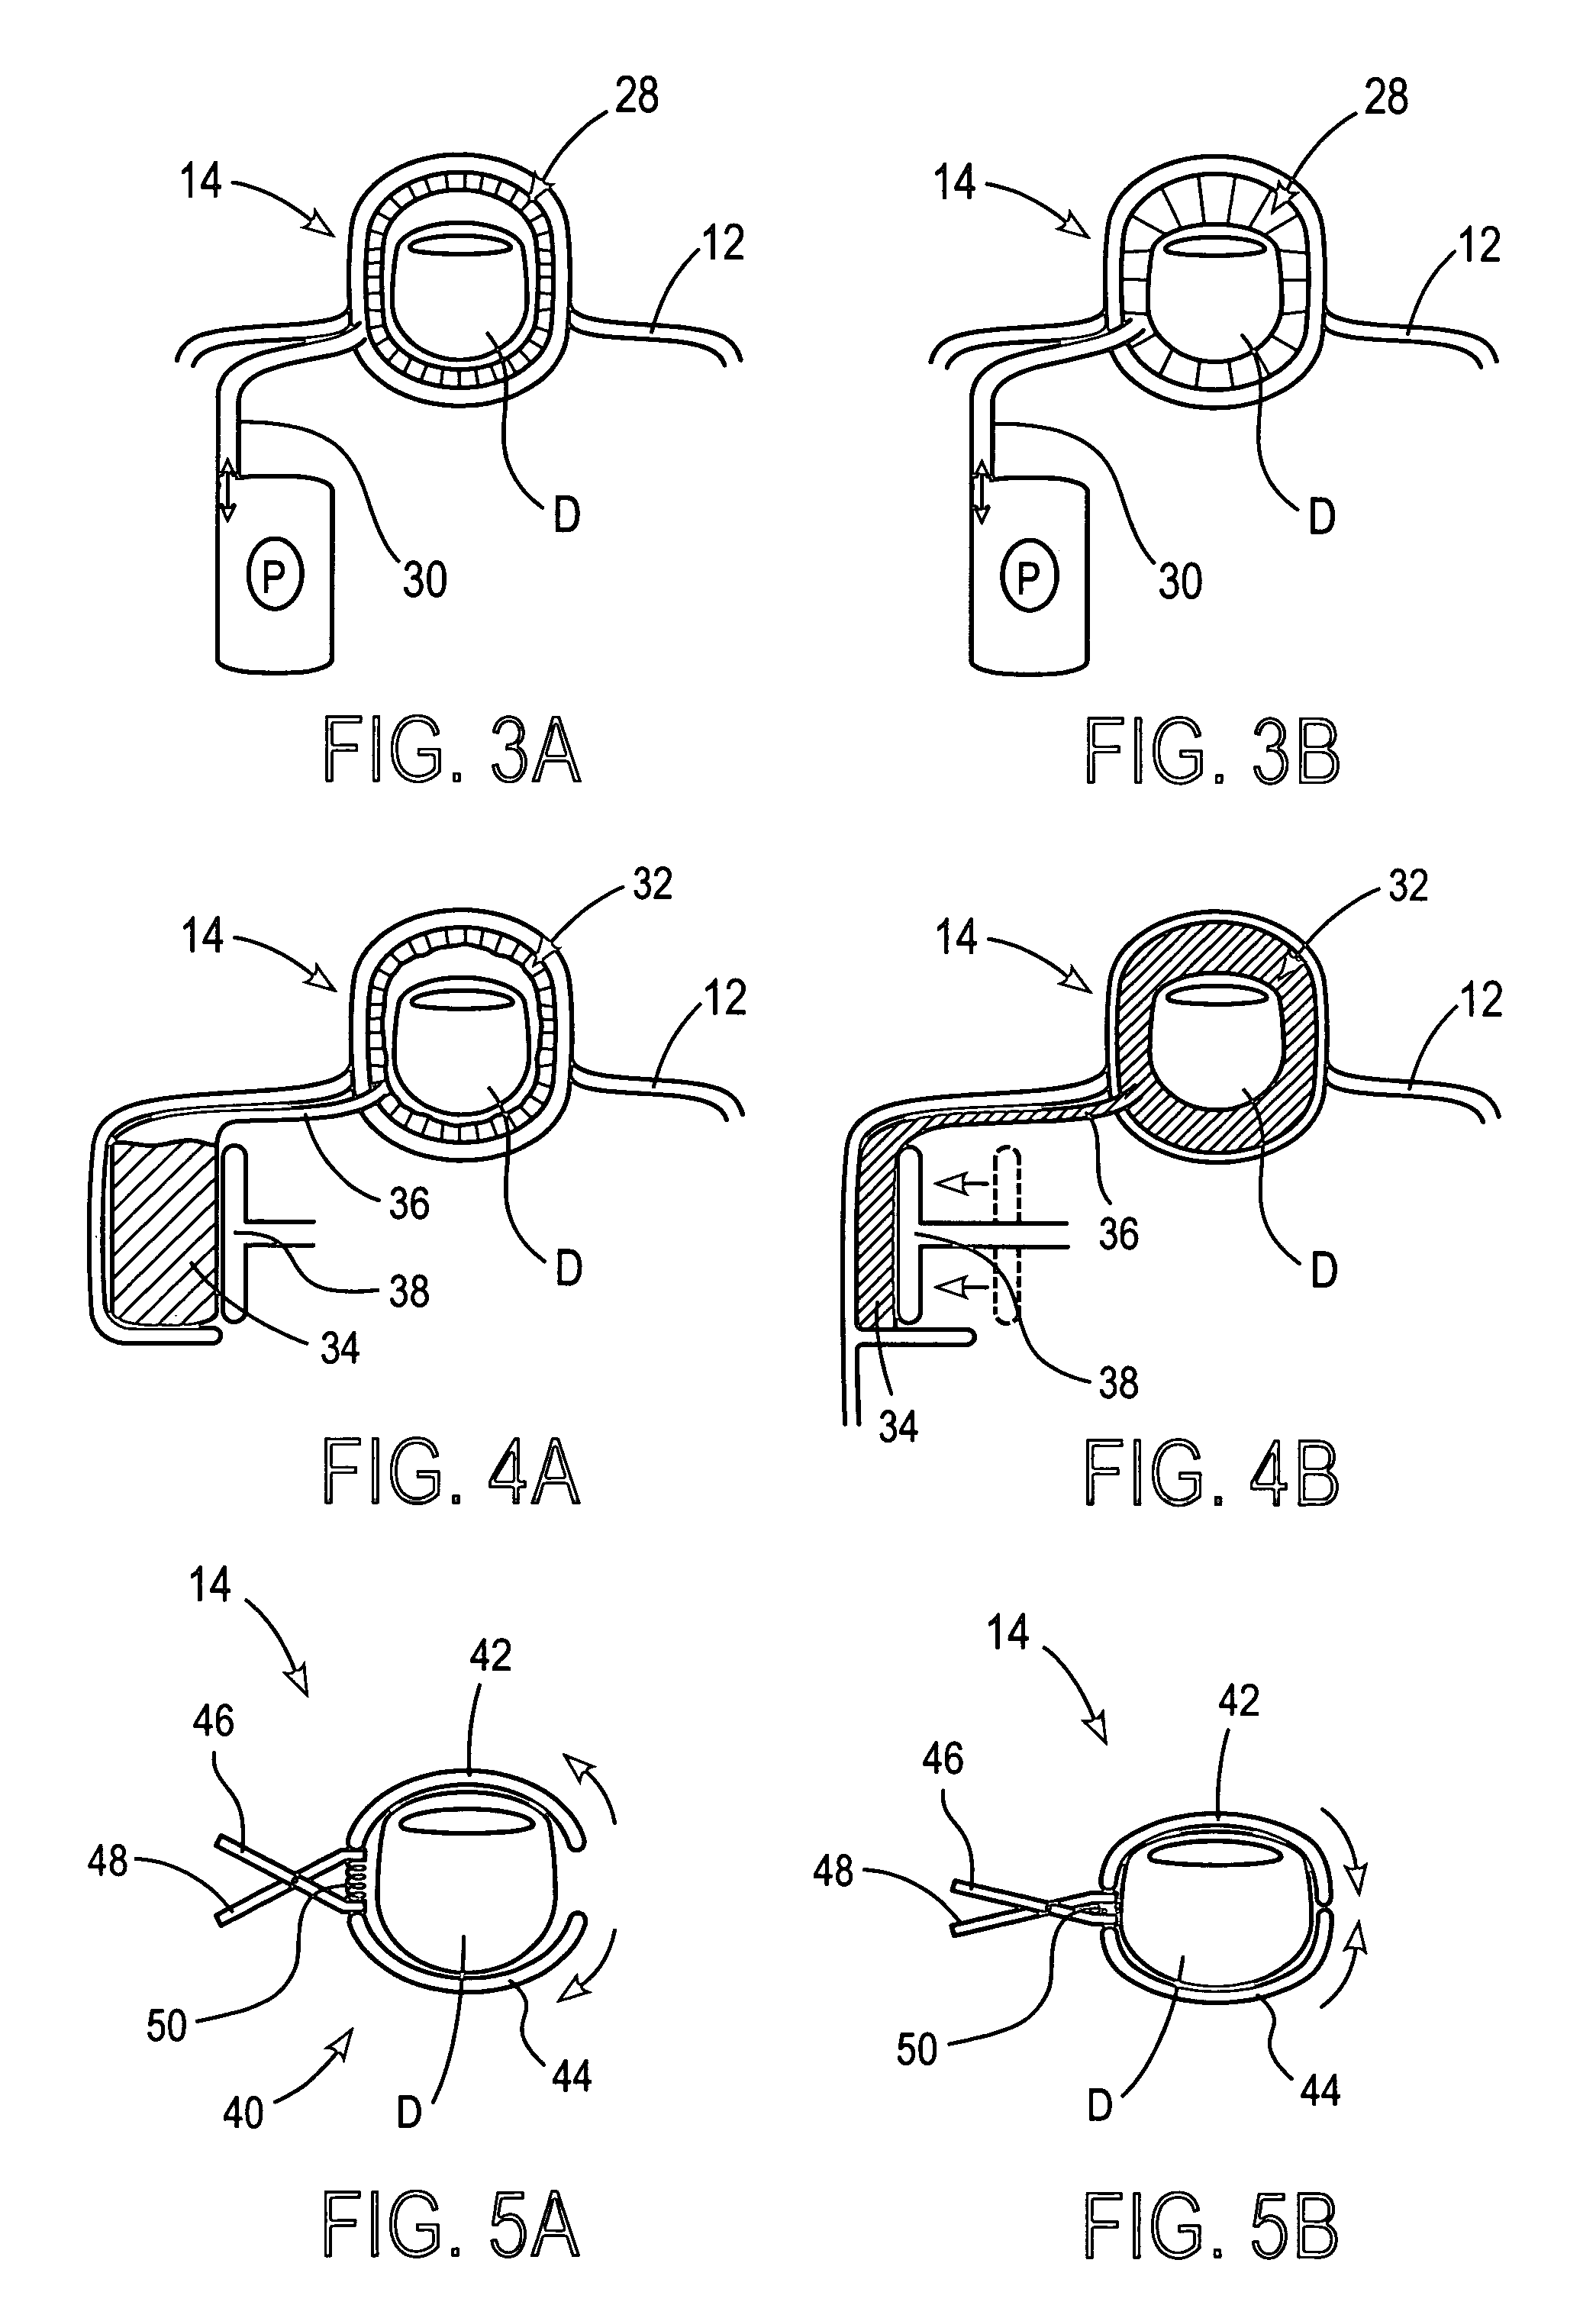 Body fluid sampling device with pivotable catalyst member